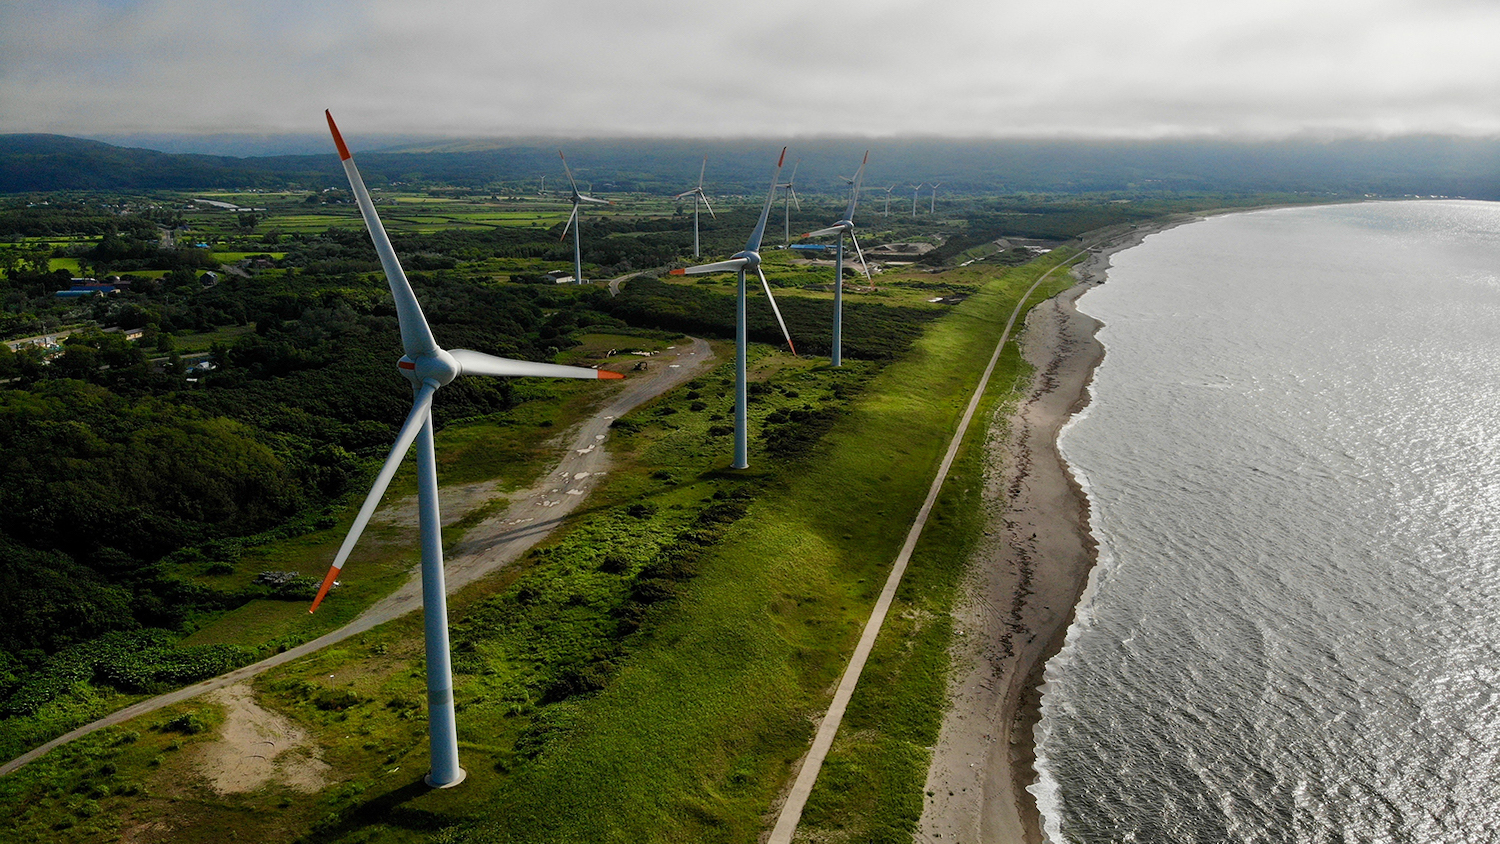 Wind Turbines - Renewable Energy Is Key To Stopping Climate Change But Poses Challenge For Wildlife Conservation - College of Natural Resources News - NC State University